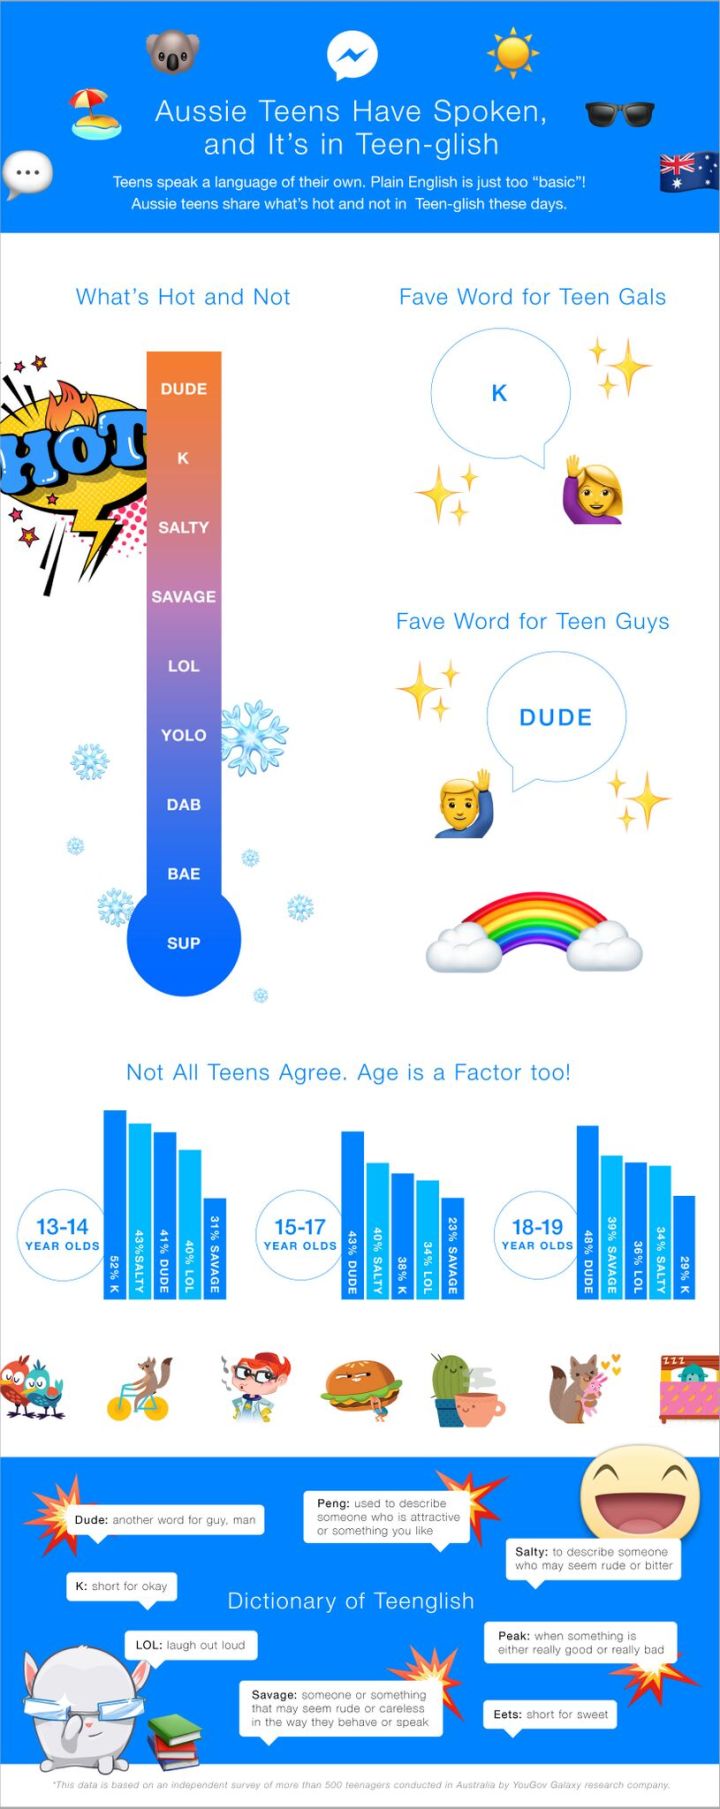 The Most Popular Word Used By Teens Has Been Around For Bloody Decades